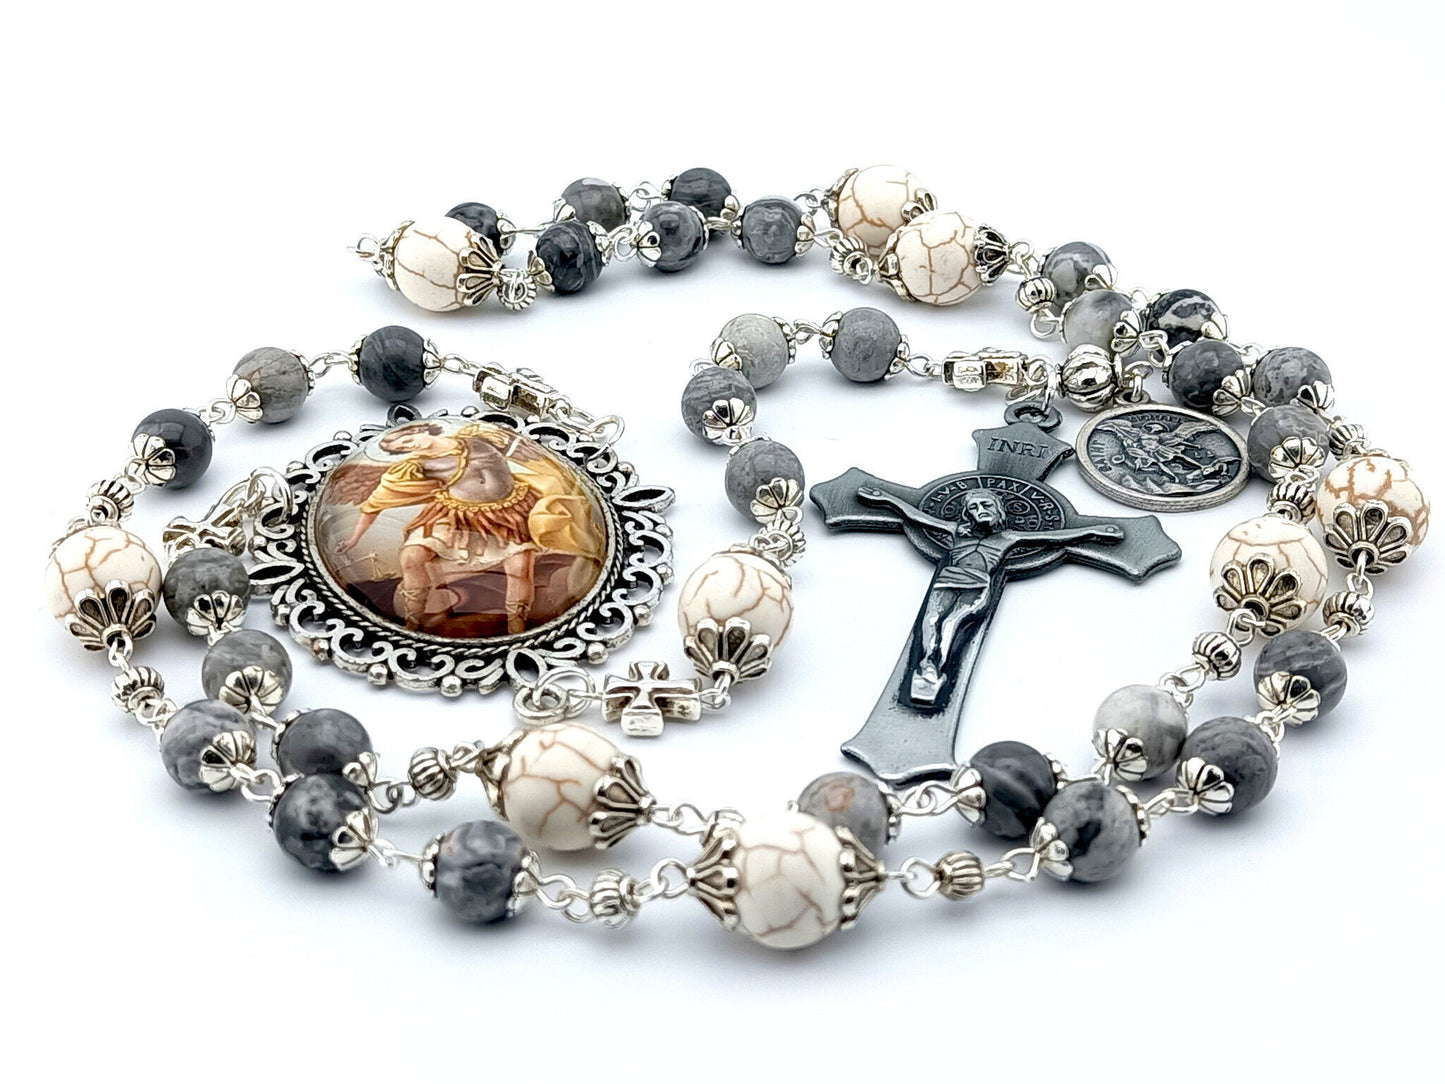 Saint Michael unique rosary beads prayer chaplet with labradorite gemstone beads, pewter crucifix and large picture centre medal.